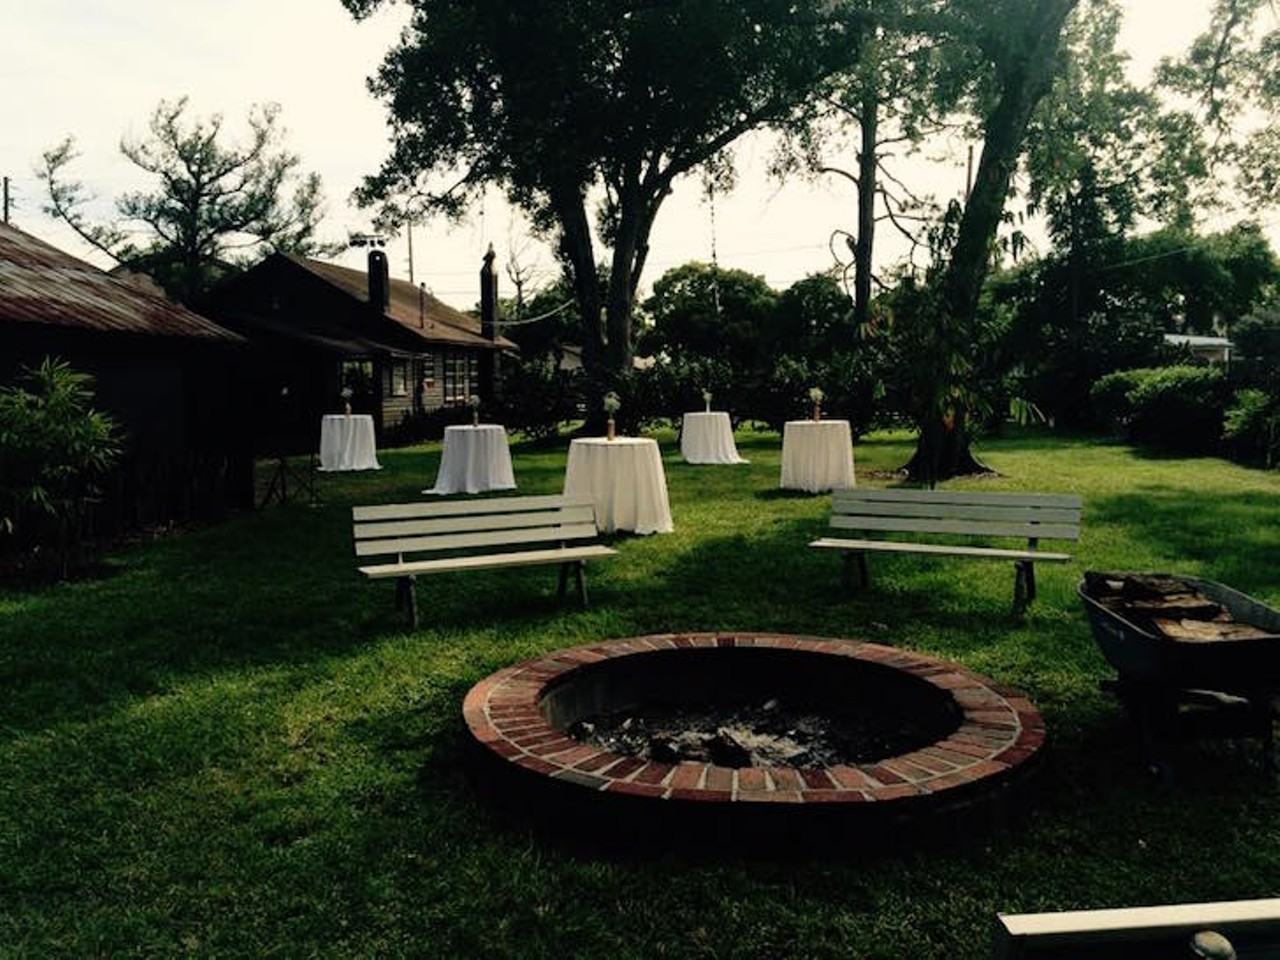 The Acre
Trendy and spread out, this Orlando venue is becoming the newest wedding hotspot thanks to all the different little areas like the barn and fire pit.
4421 Edgewater Drive | 407-704-5161
Photo via Acre Orlando/Facebook